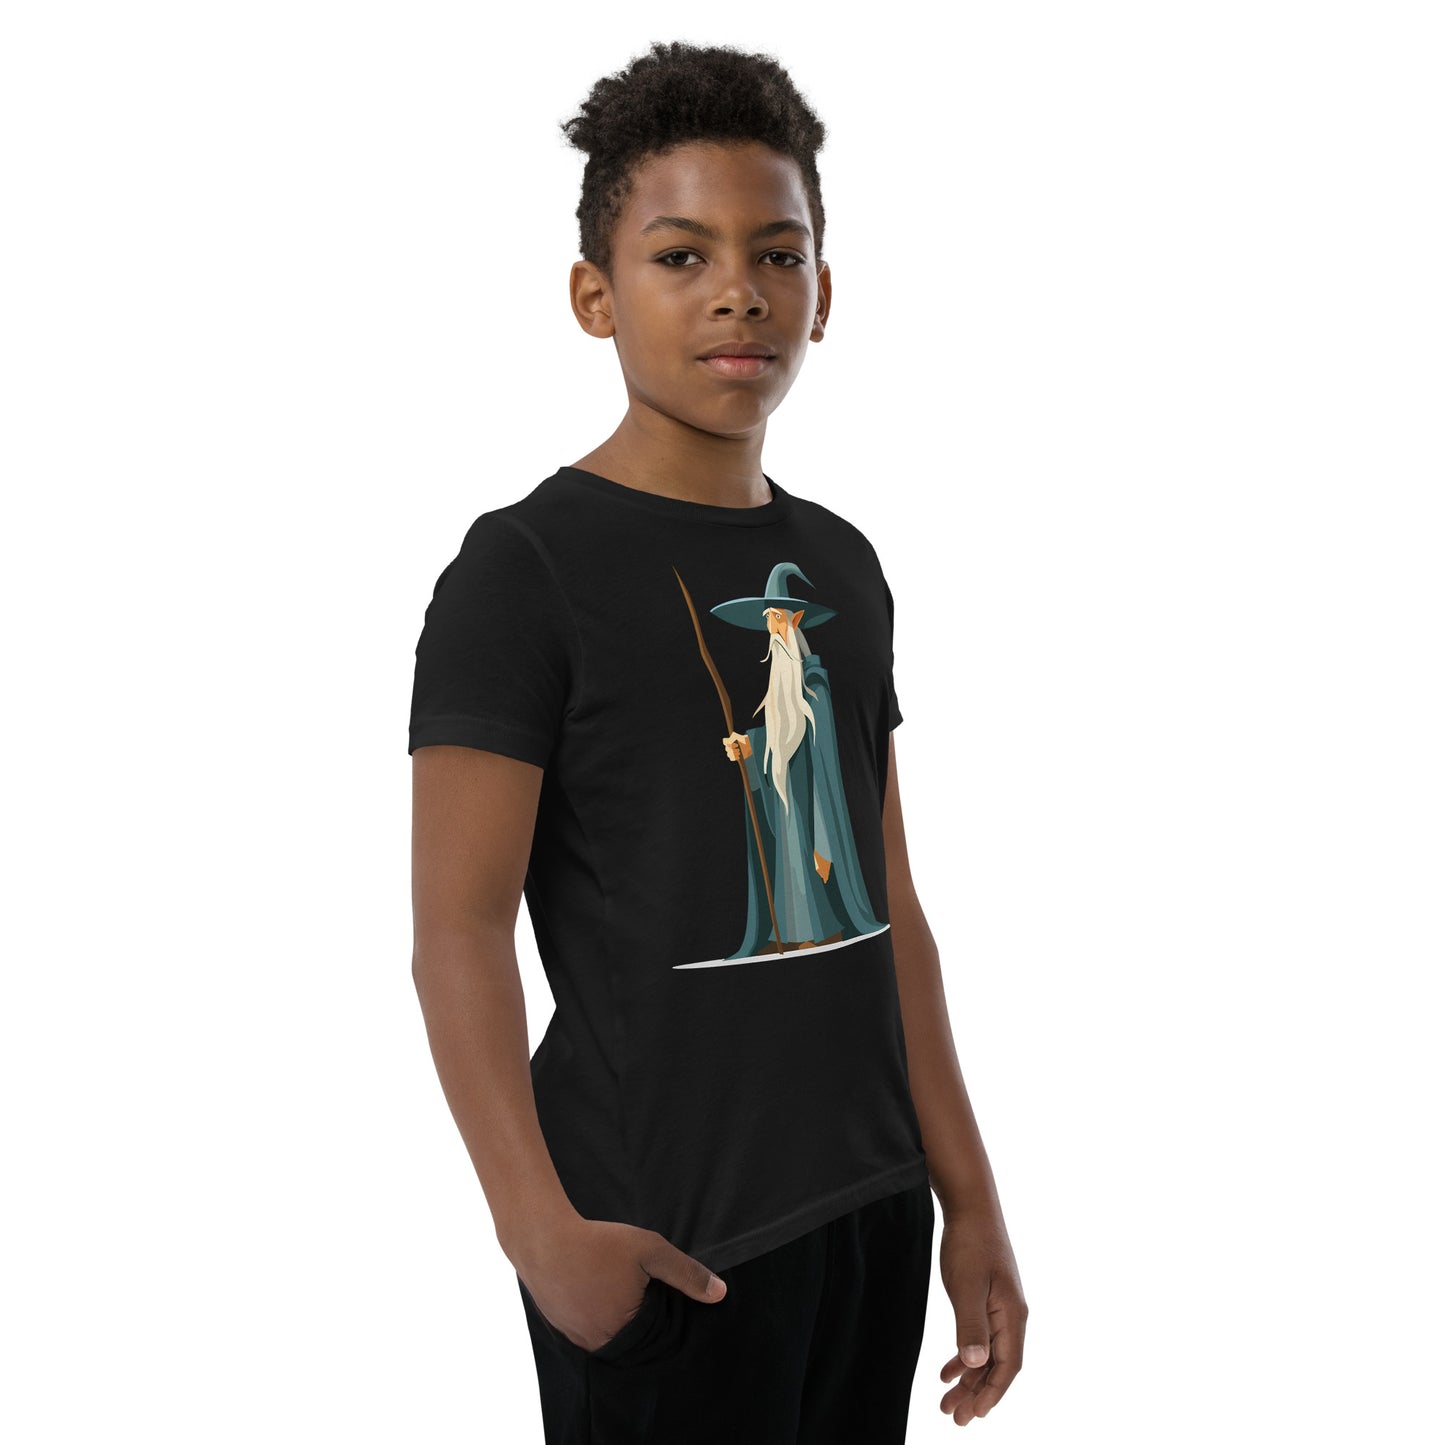 Boy with a black T-shirt with a picture of a magician